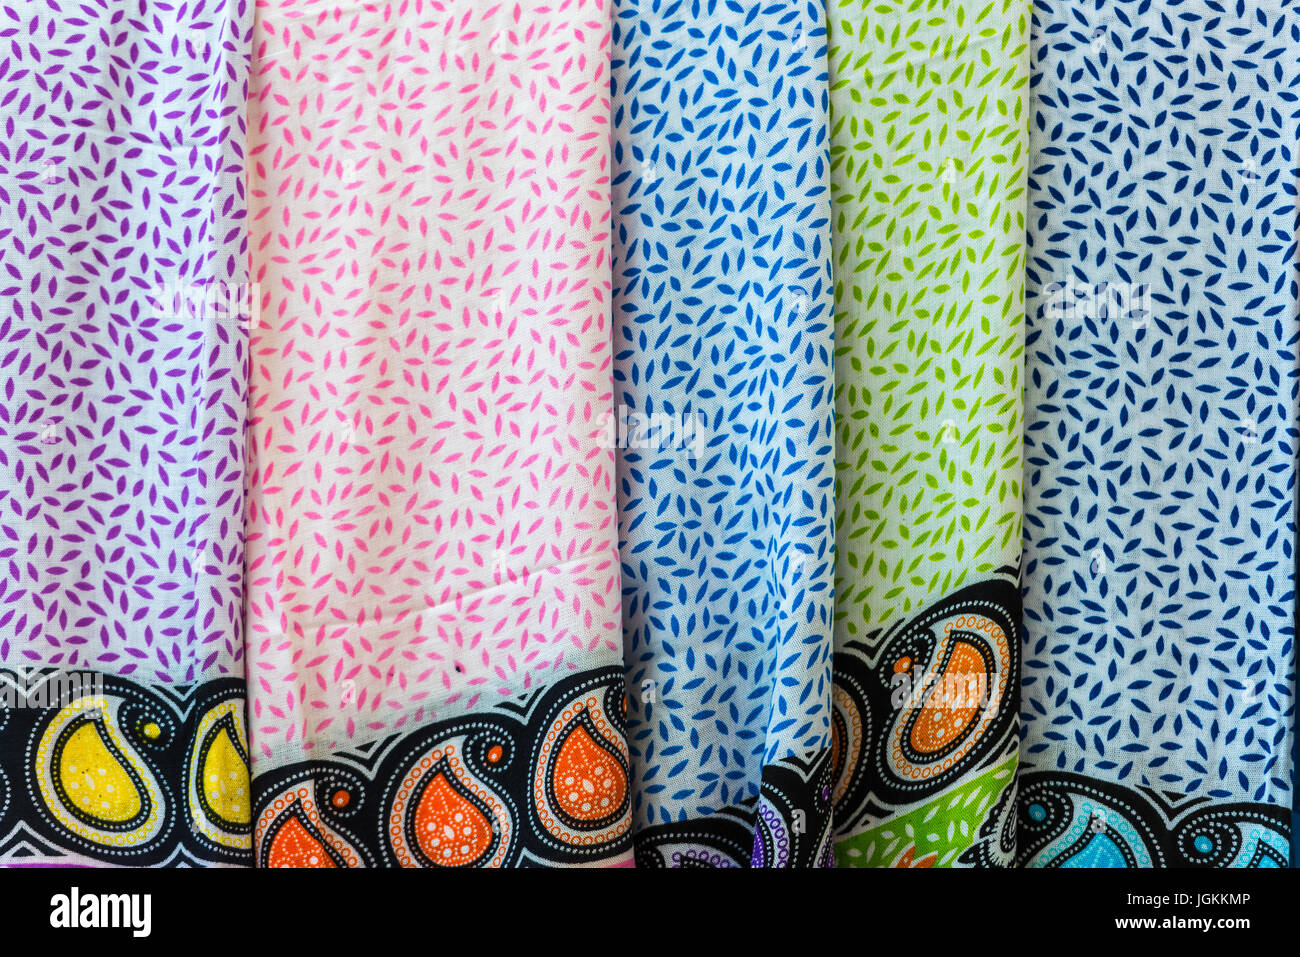 Selection of colorful women scarves at a market Stock Photo